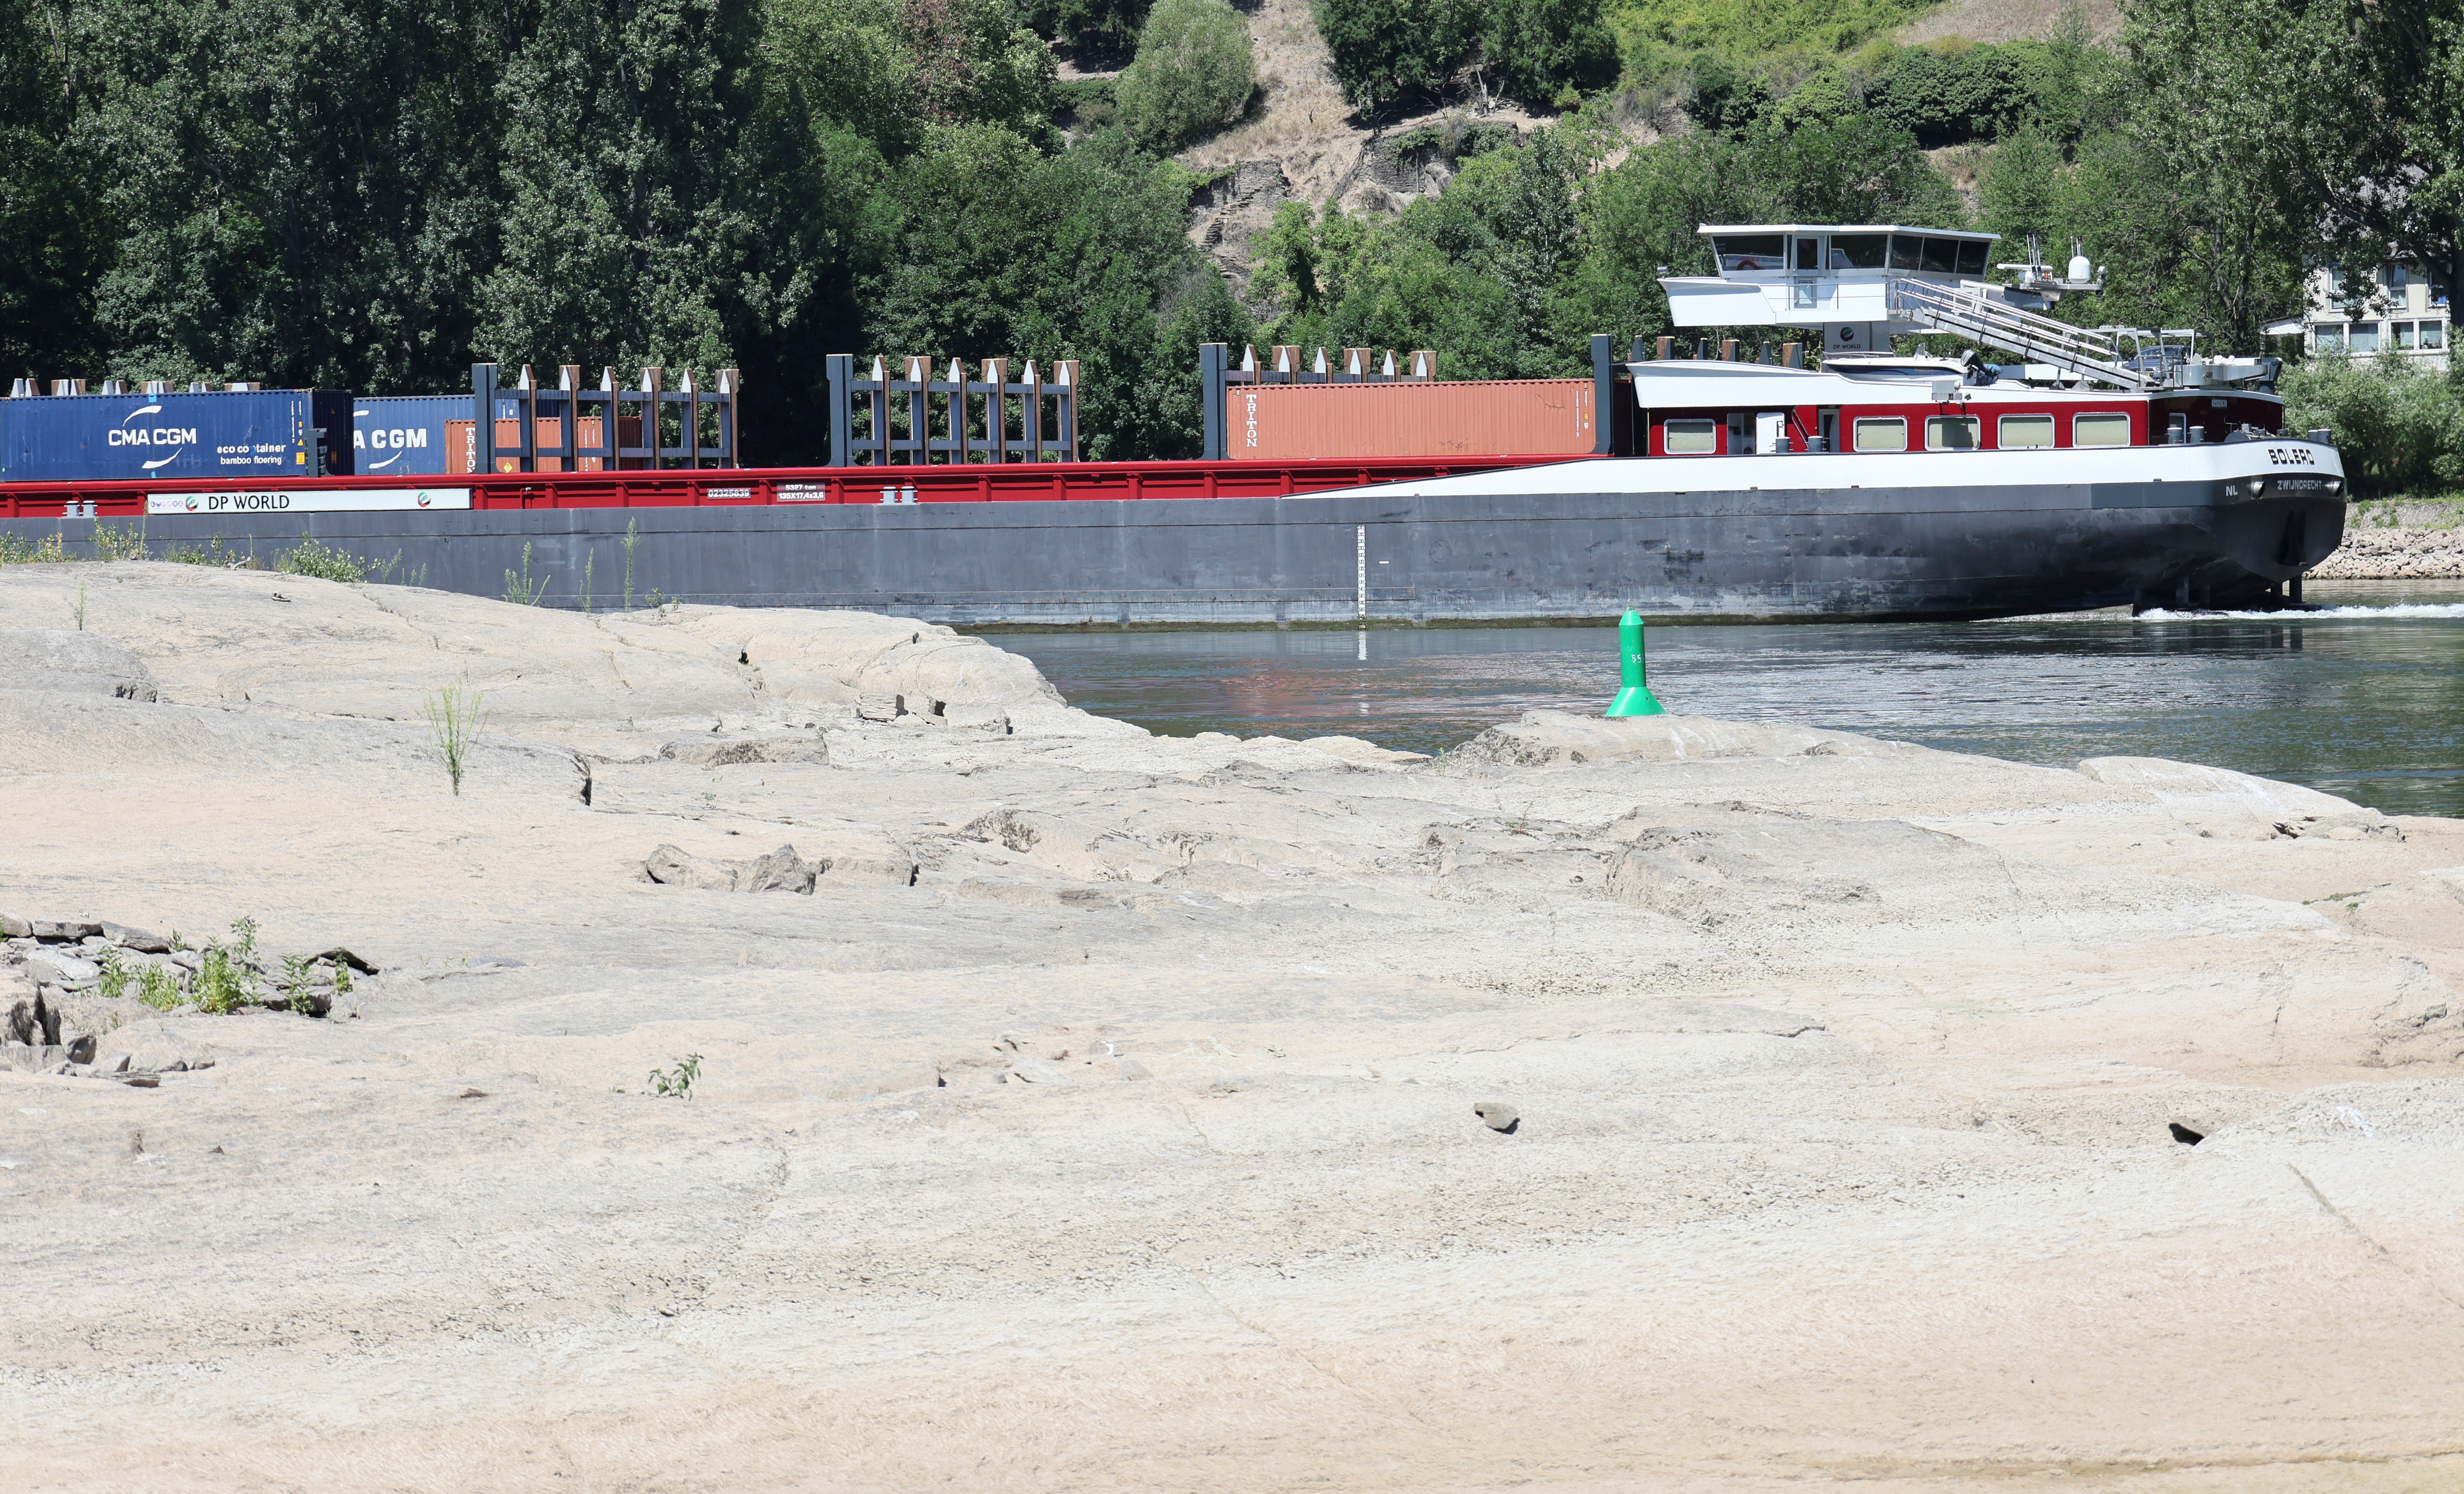 Low water levels after recent dry weather continue to prevent cargo vessels from sailing fully loaded on the river Rhine in Germany